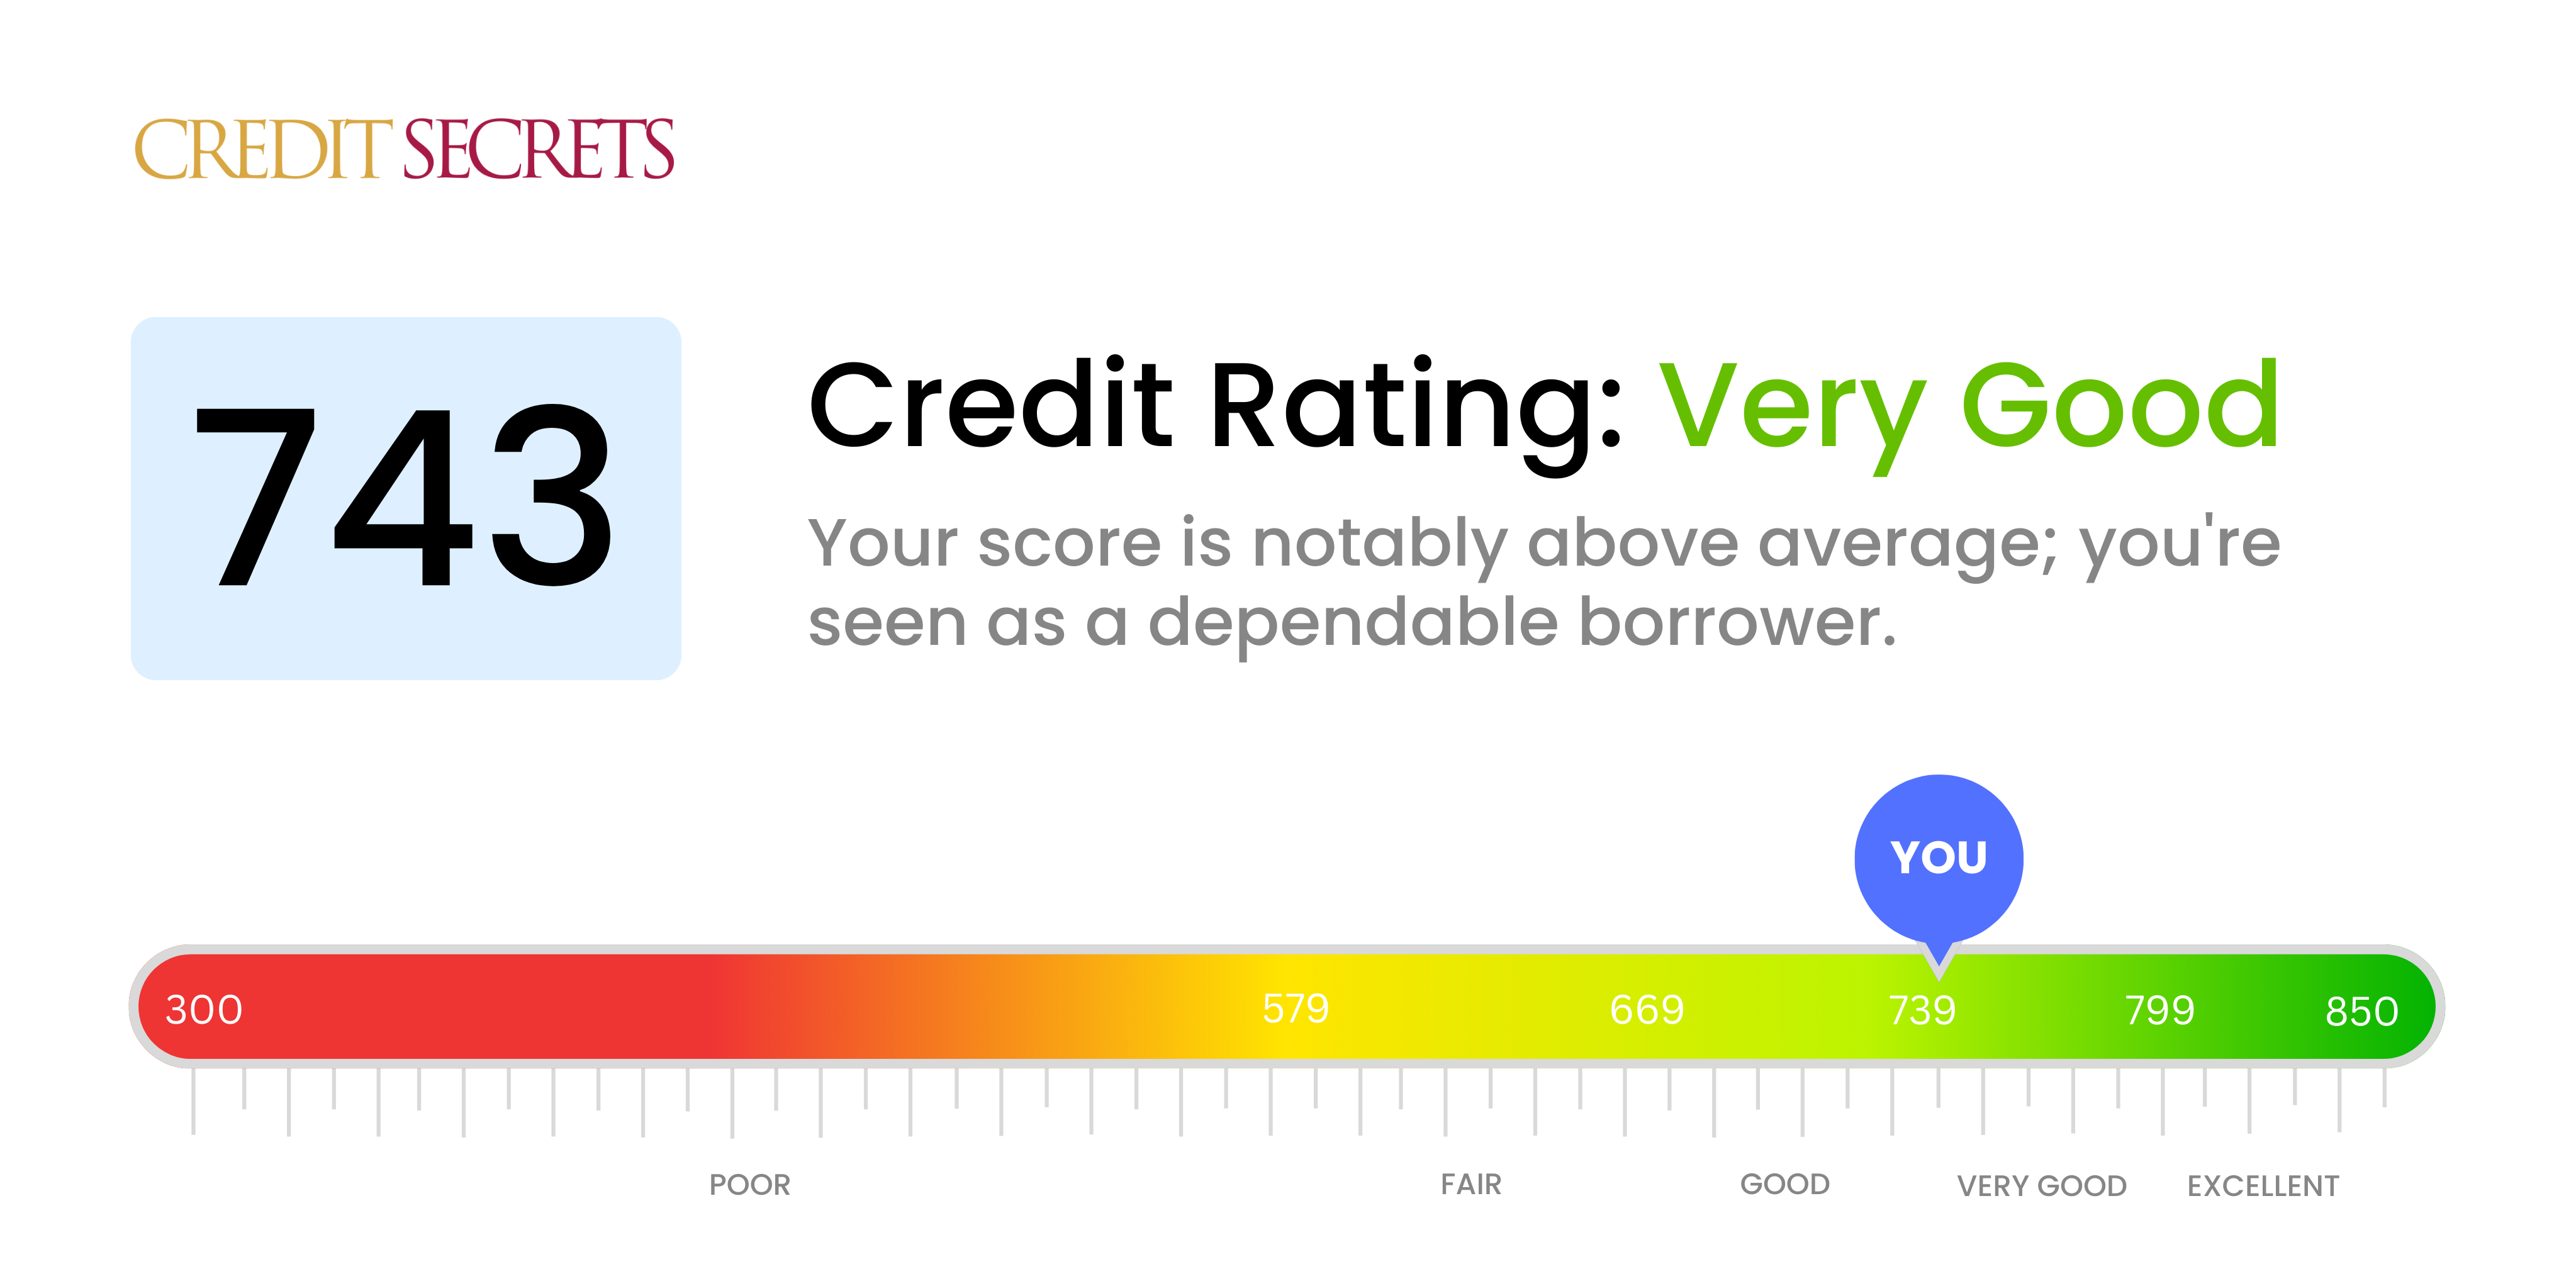 Is 743 a good credit score?